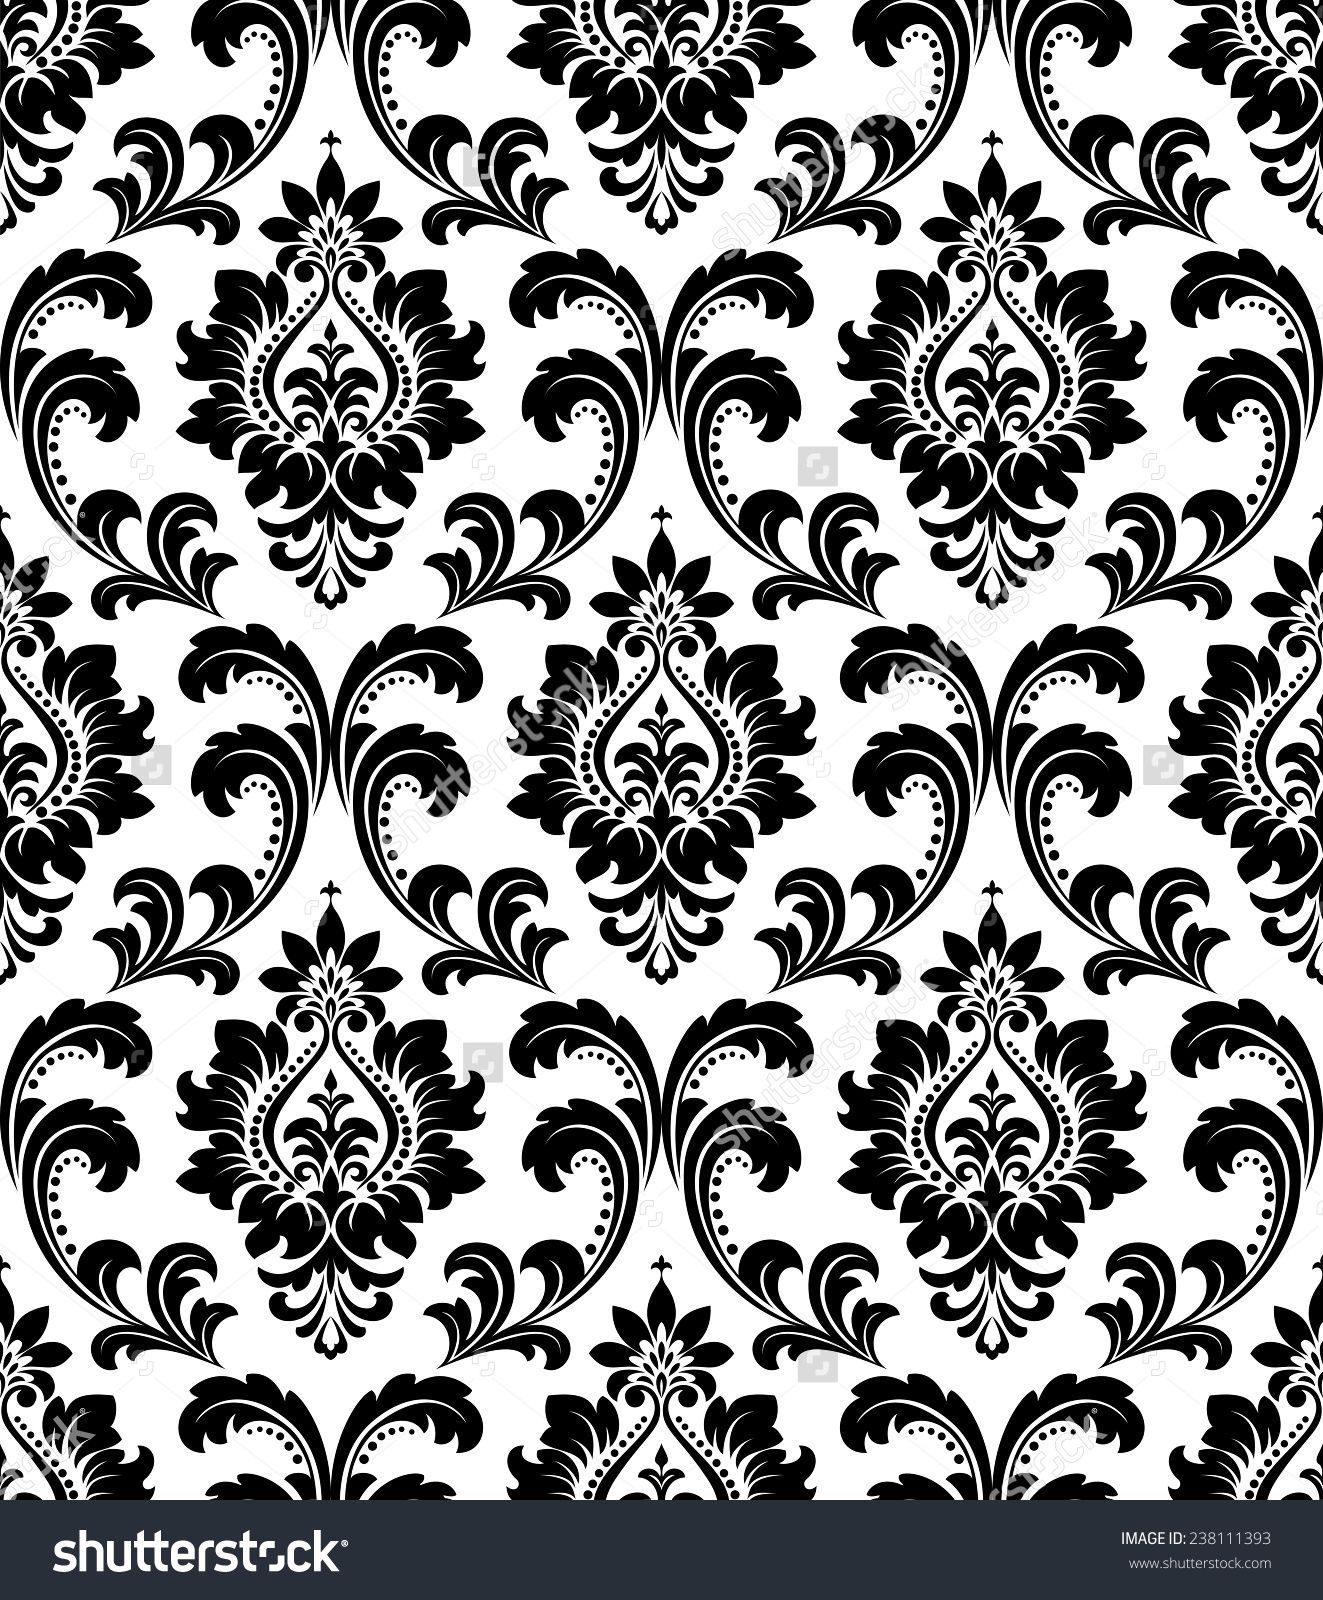 black and white floral wallpaper designs